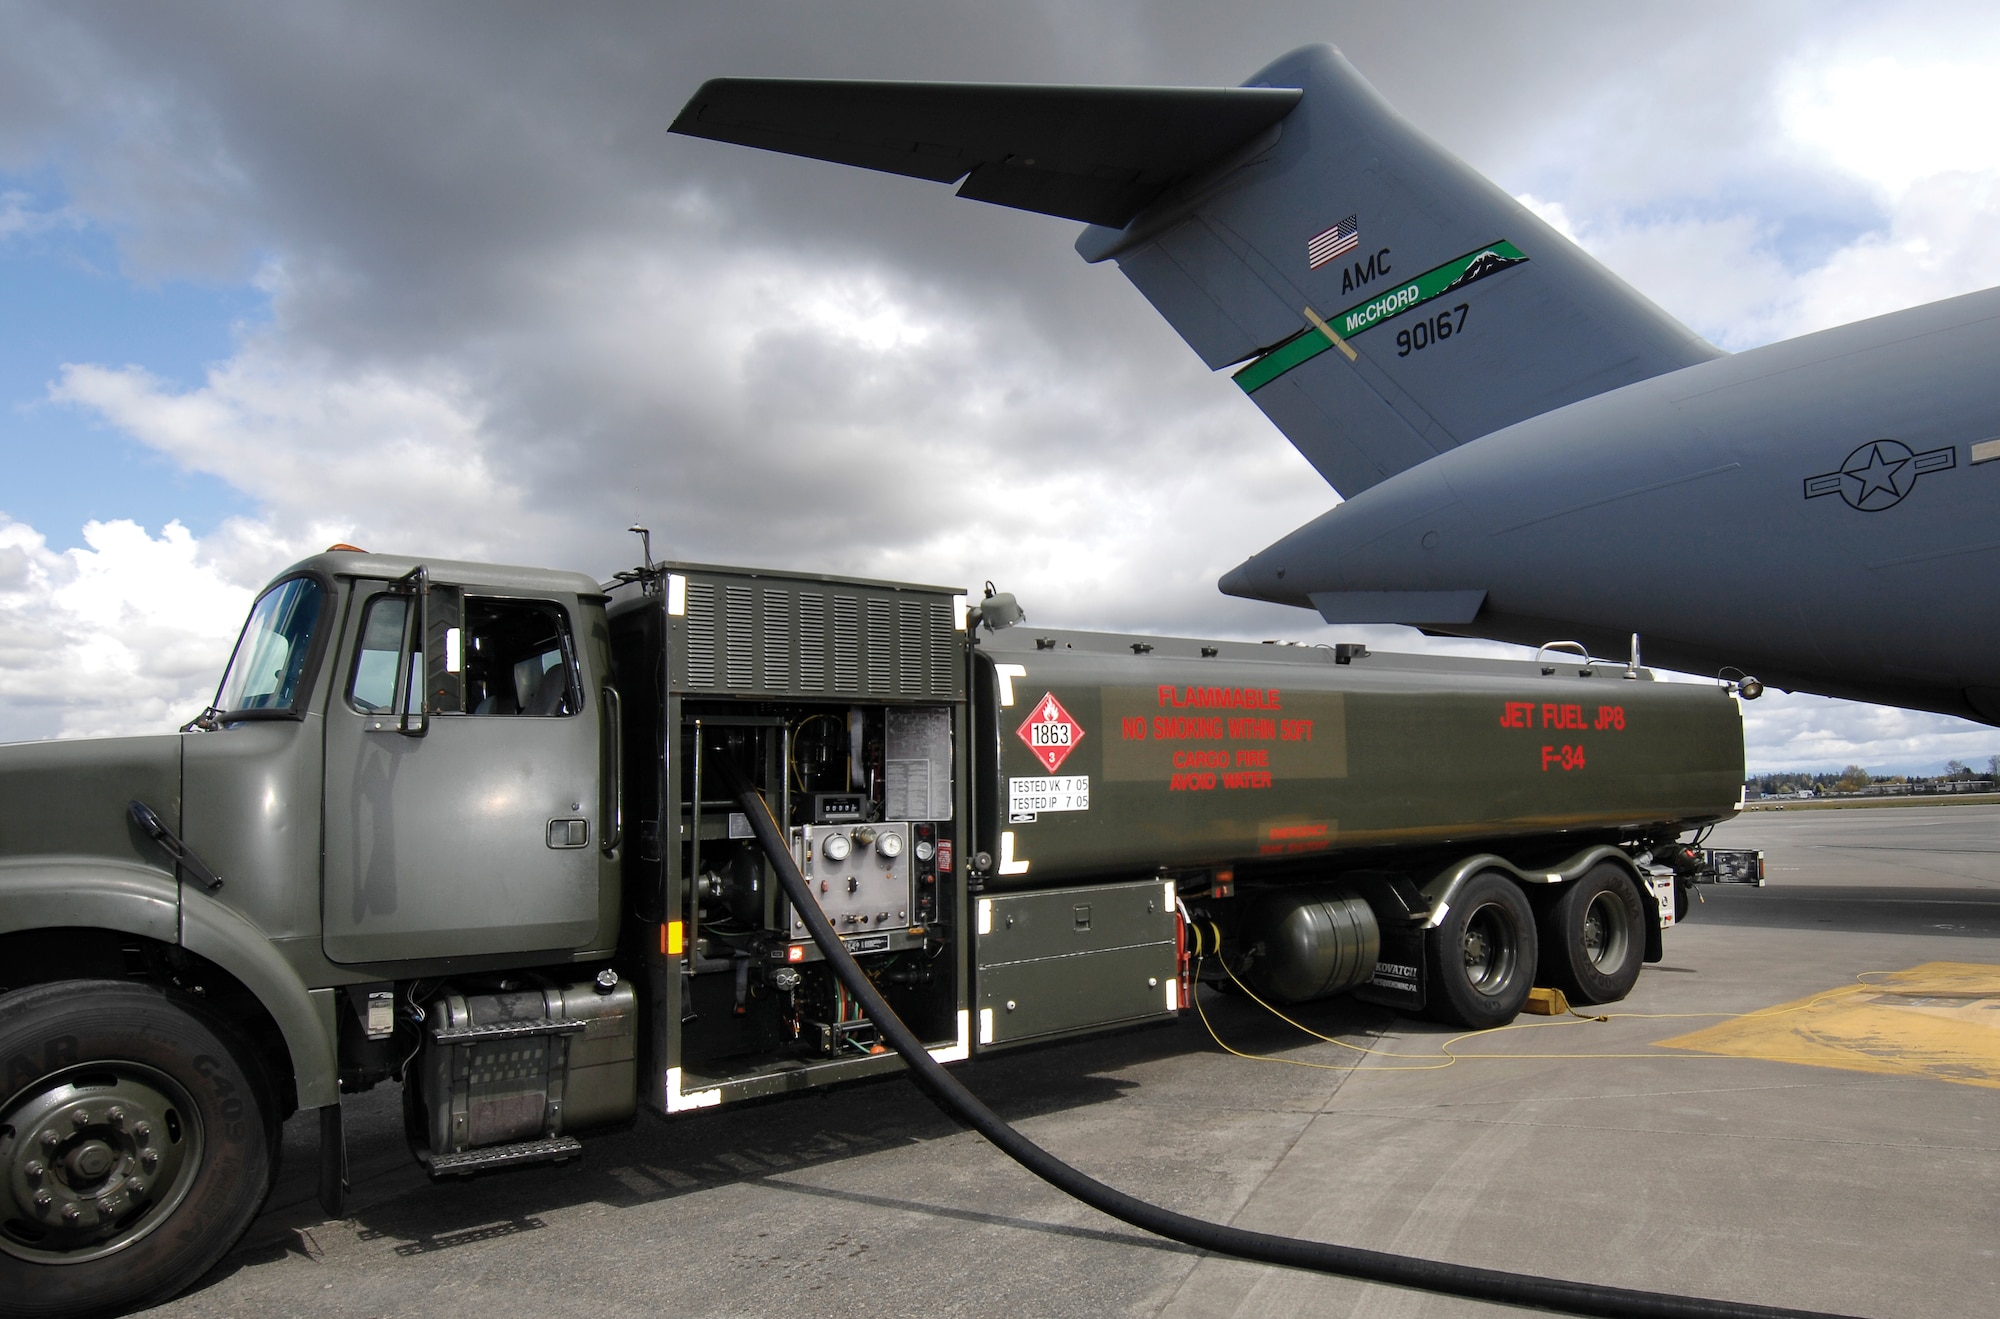 Fuel carried in trucks like this will soon be a blend of synthetic and traditional jet fuel. (U.S. Air Force Photo/Abner Guzman)